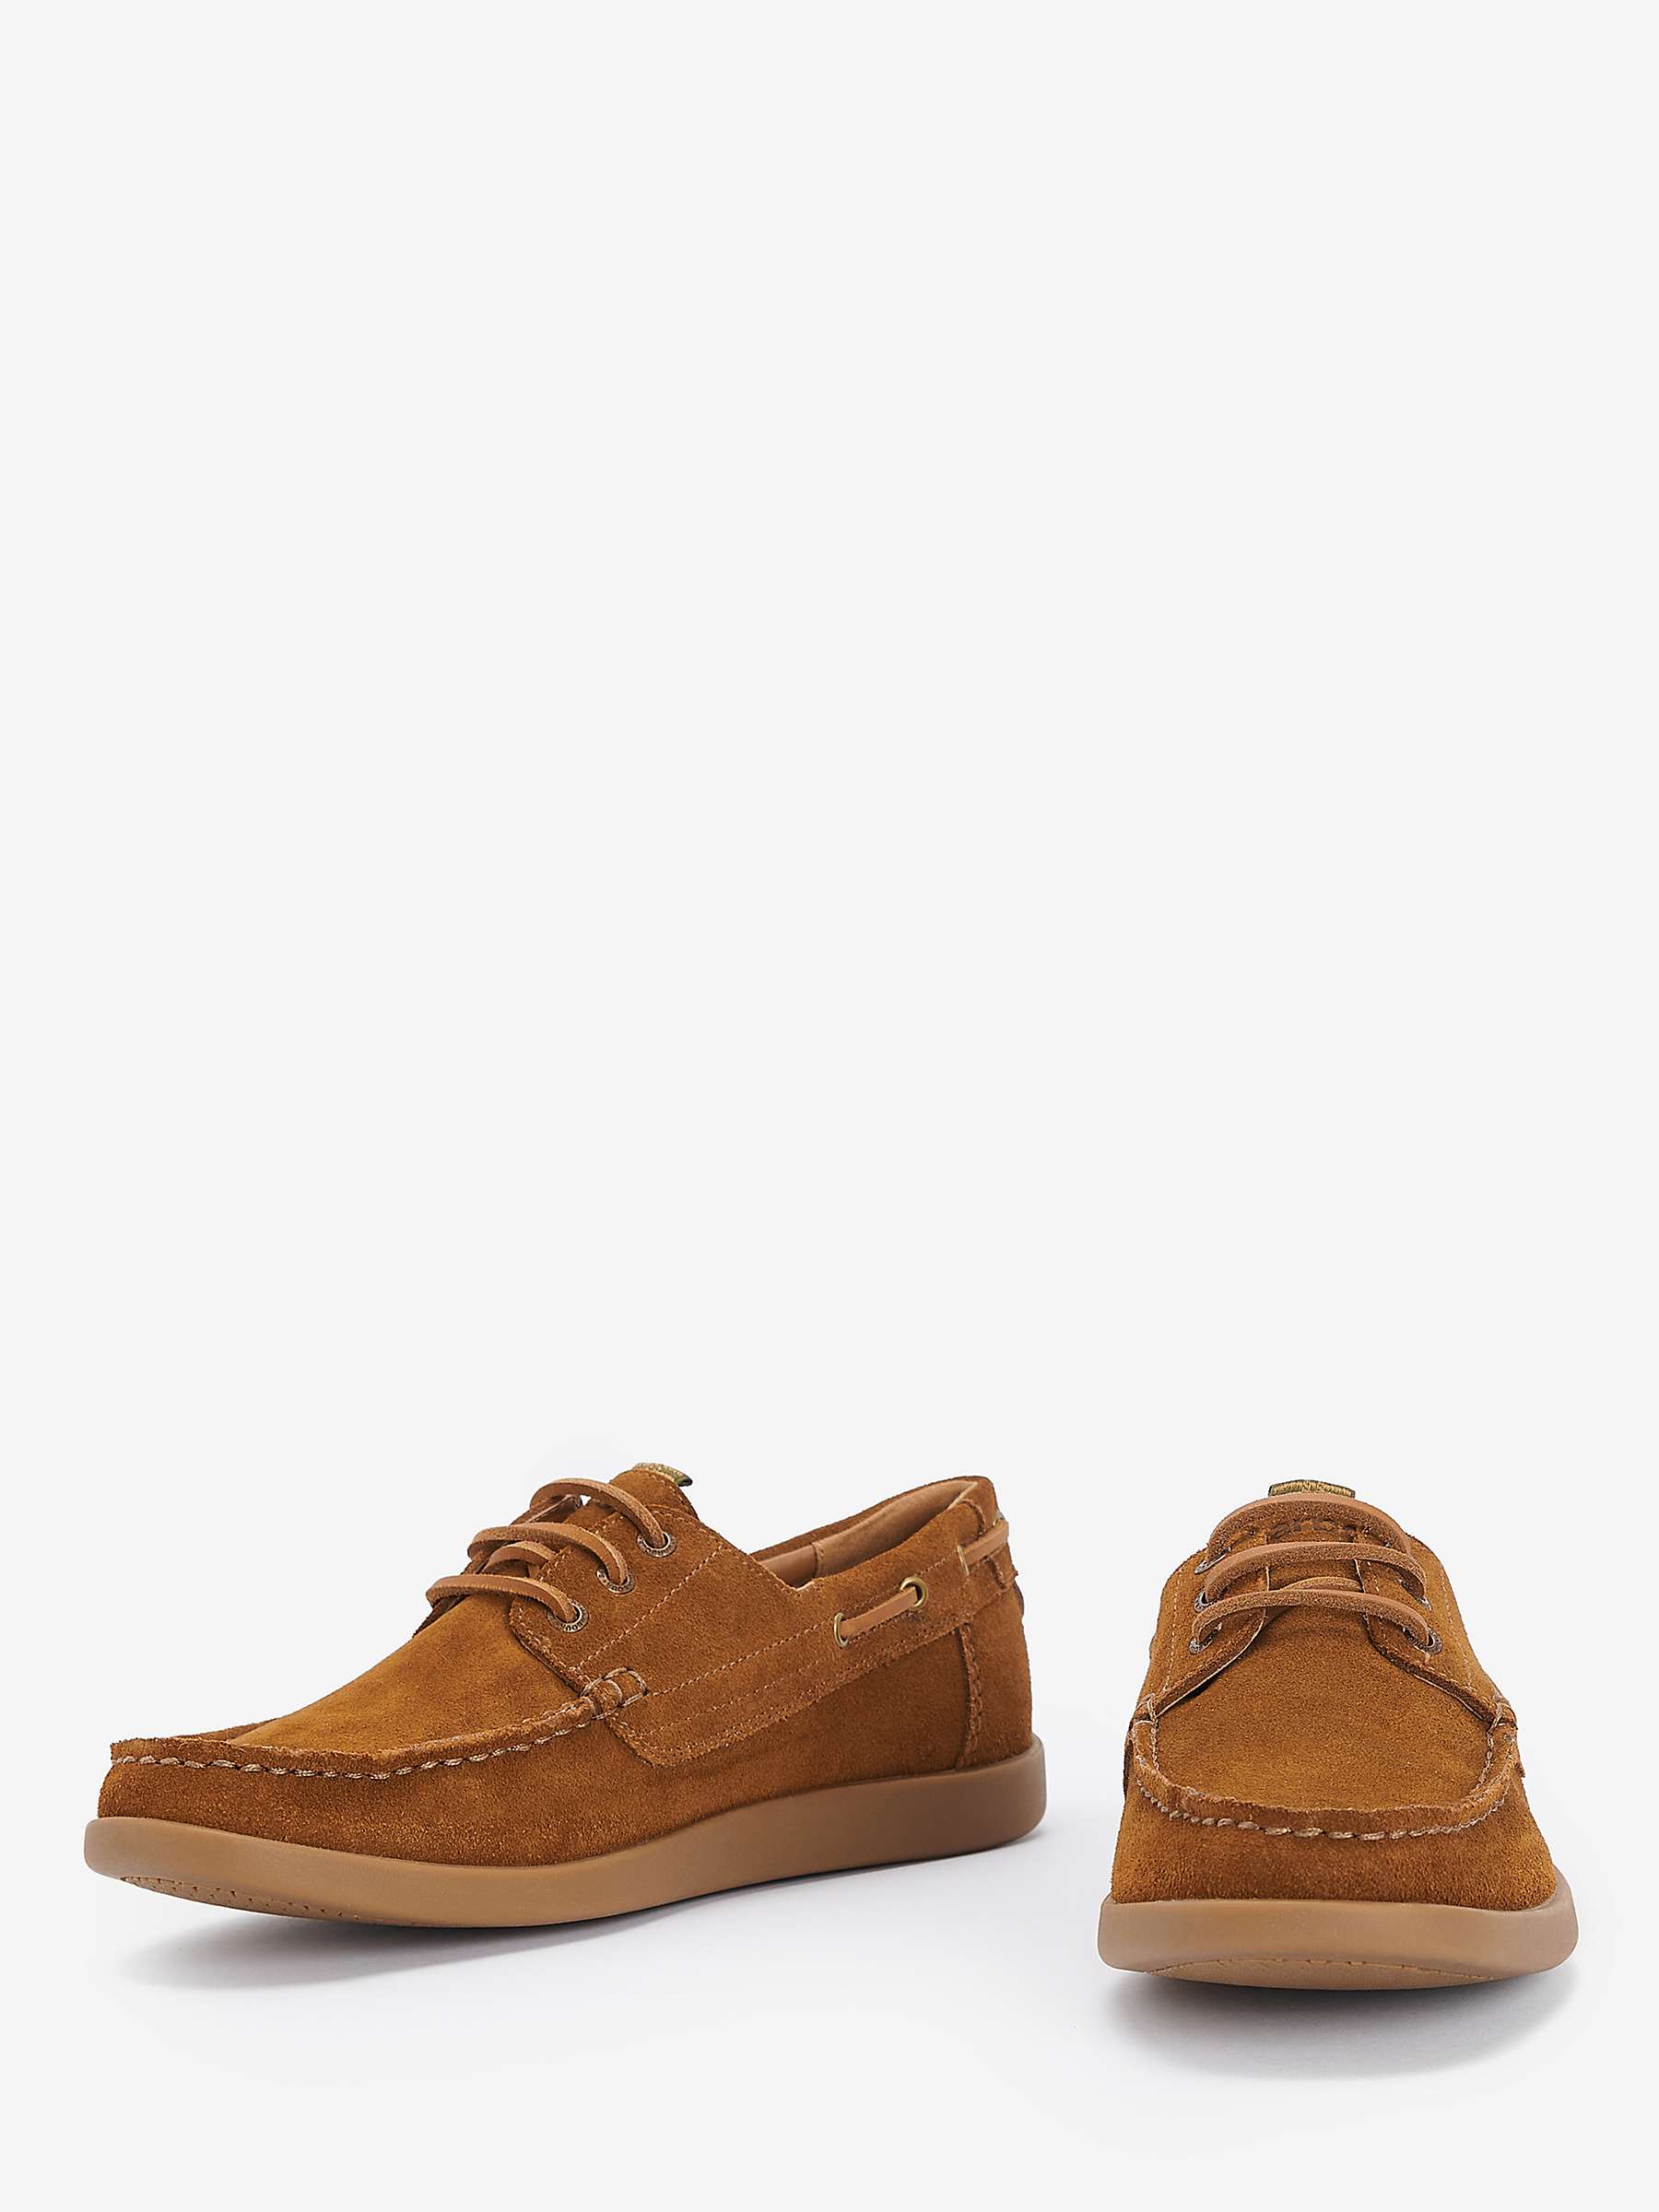 Buy Barbour Armada Boat Shoes, Brown Online at johnlewis.com